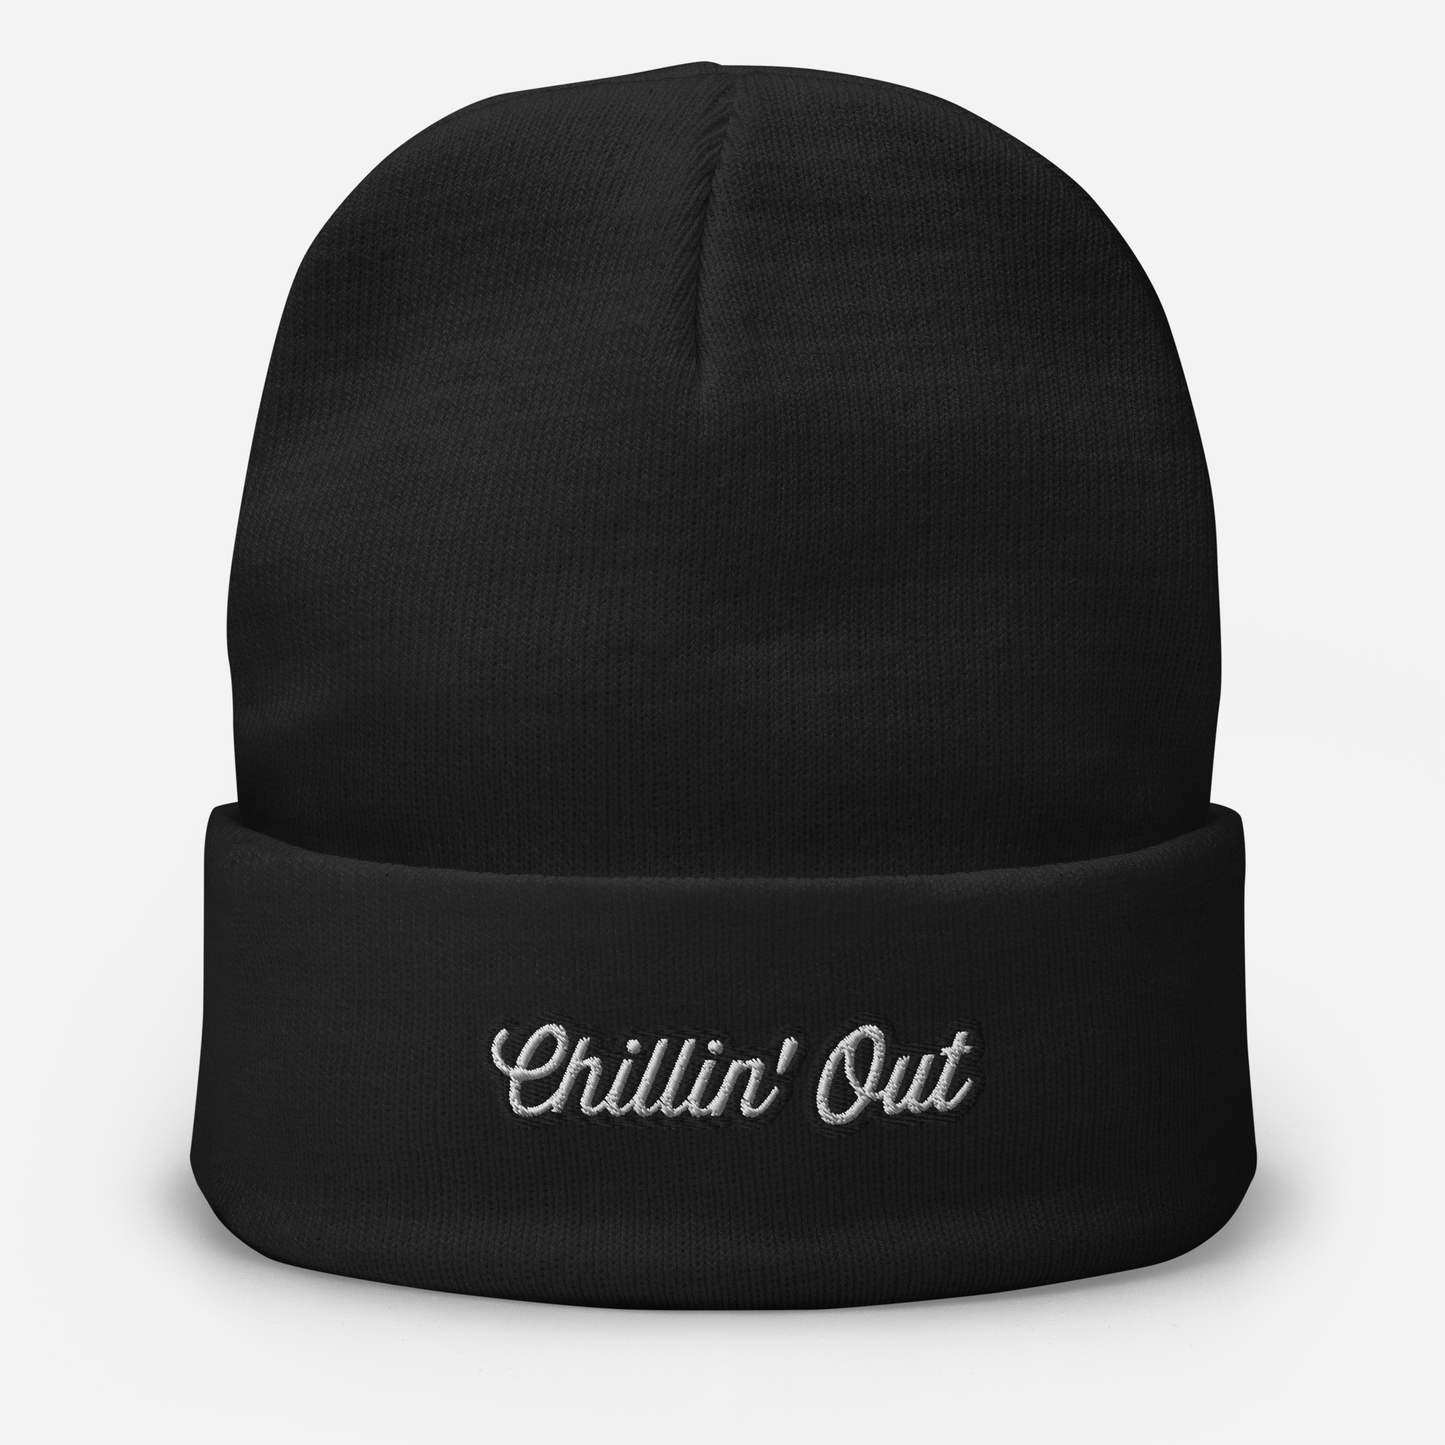 Chillin' Out - Embroidered Beanie